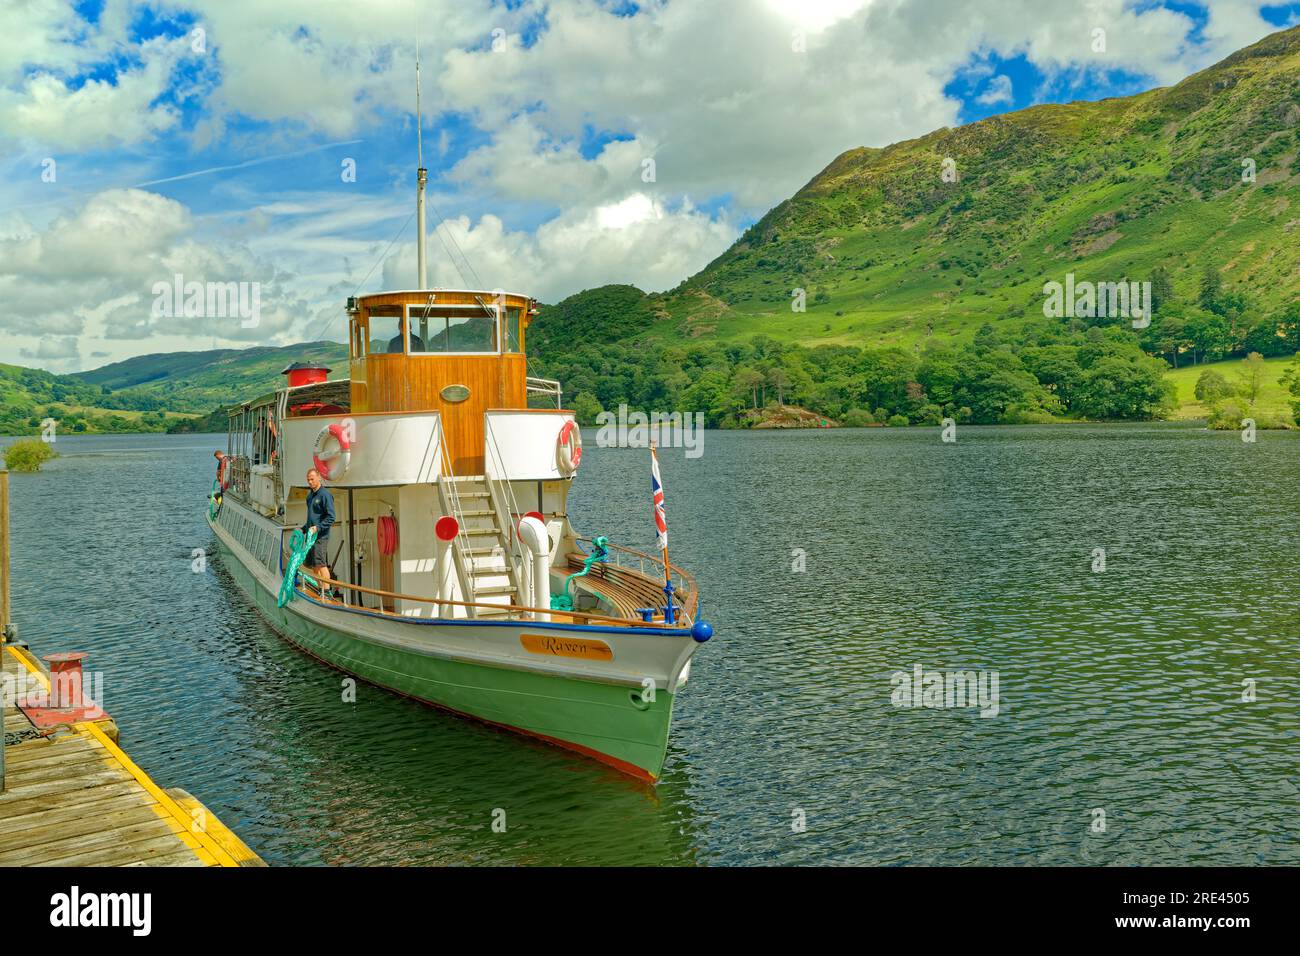 Ullswater cruise boat 'Raven' arriving at Glenridding Pier on Ullswater, Cumbria in England. Stock Photo